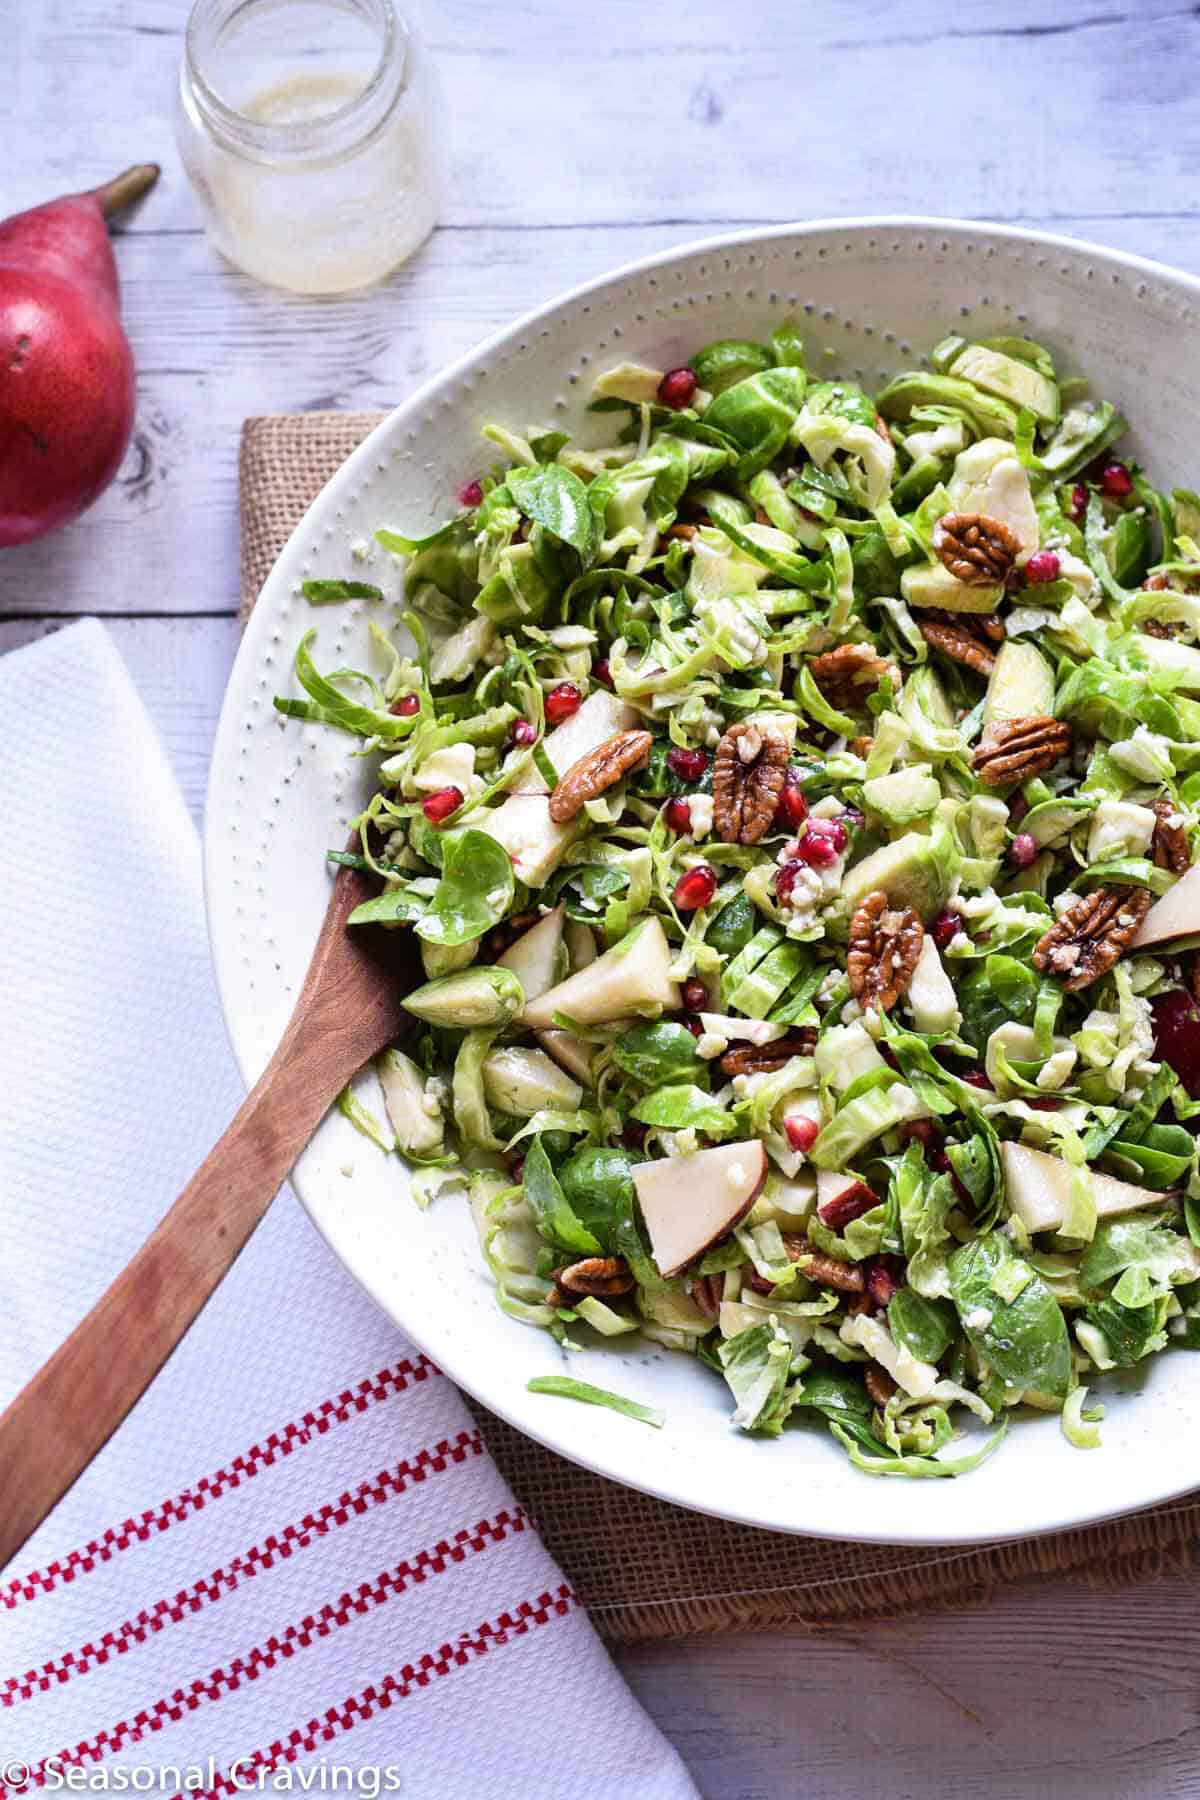 Brussel Sprout Salad with Pear and Pomegranate - delicious fall salad with brussel sprouts, pears, pecans, blue cheese and pomegranate arils {gluten free}